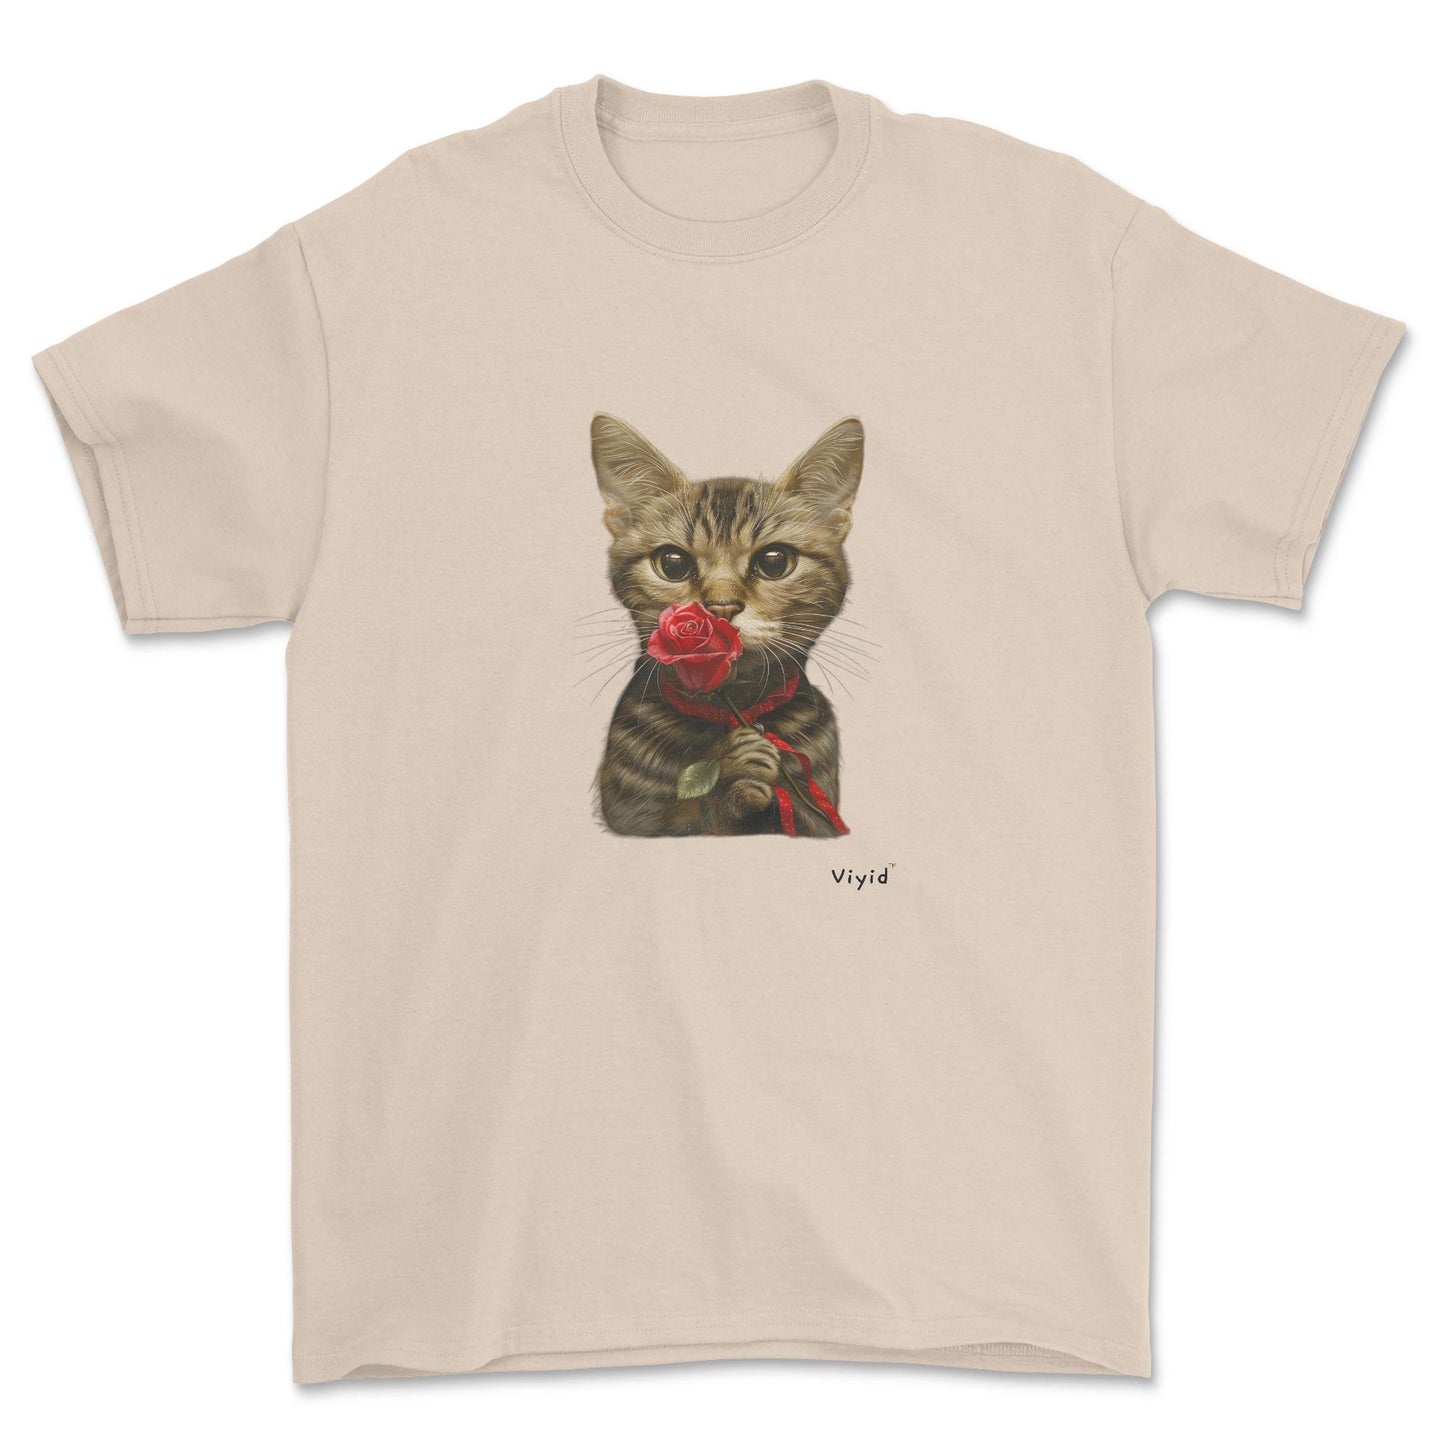 sniffing rose domestic shorthair cat adult t-shirt sand